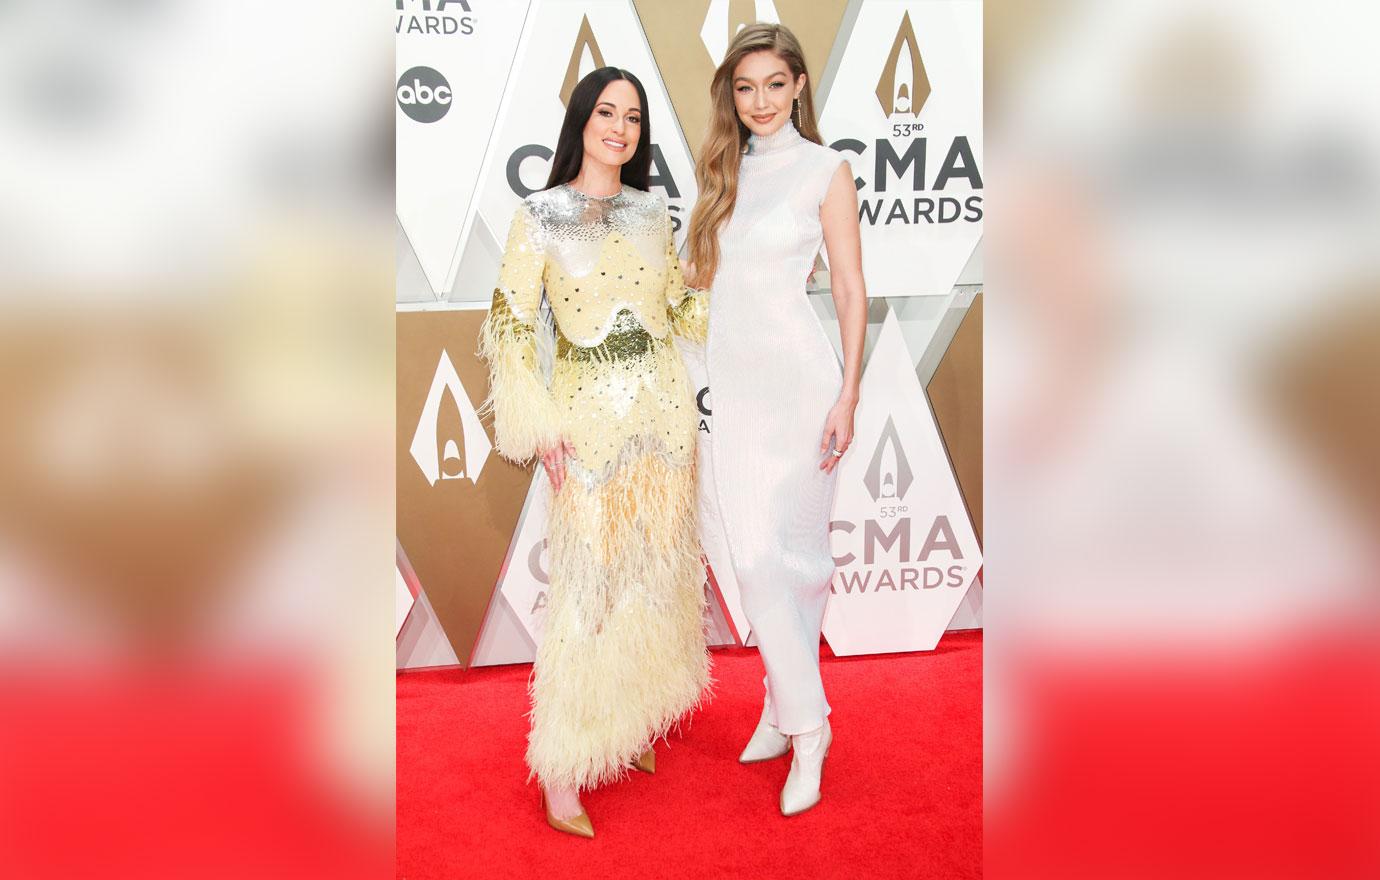 The Best & Worst Dressed At The CMA Awards 2019